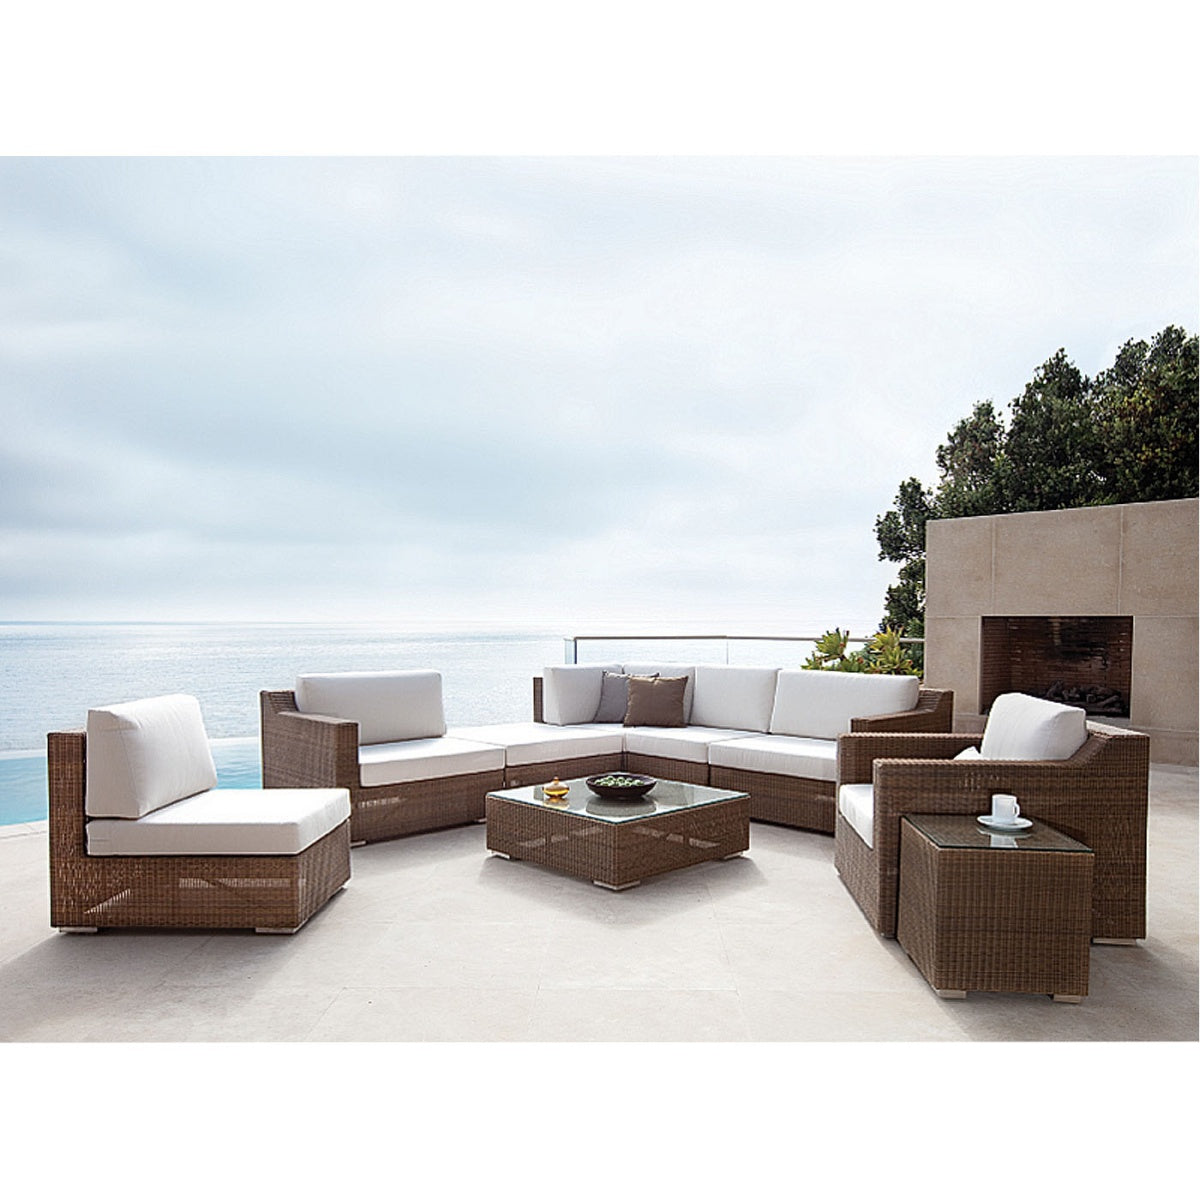 Westminster Teak - 9 Piece Sofa Sectional Set High End Synthetic Wicker - 70240